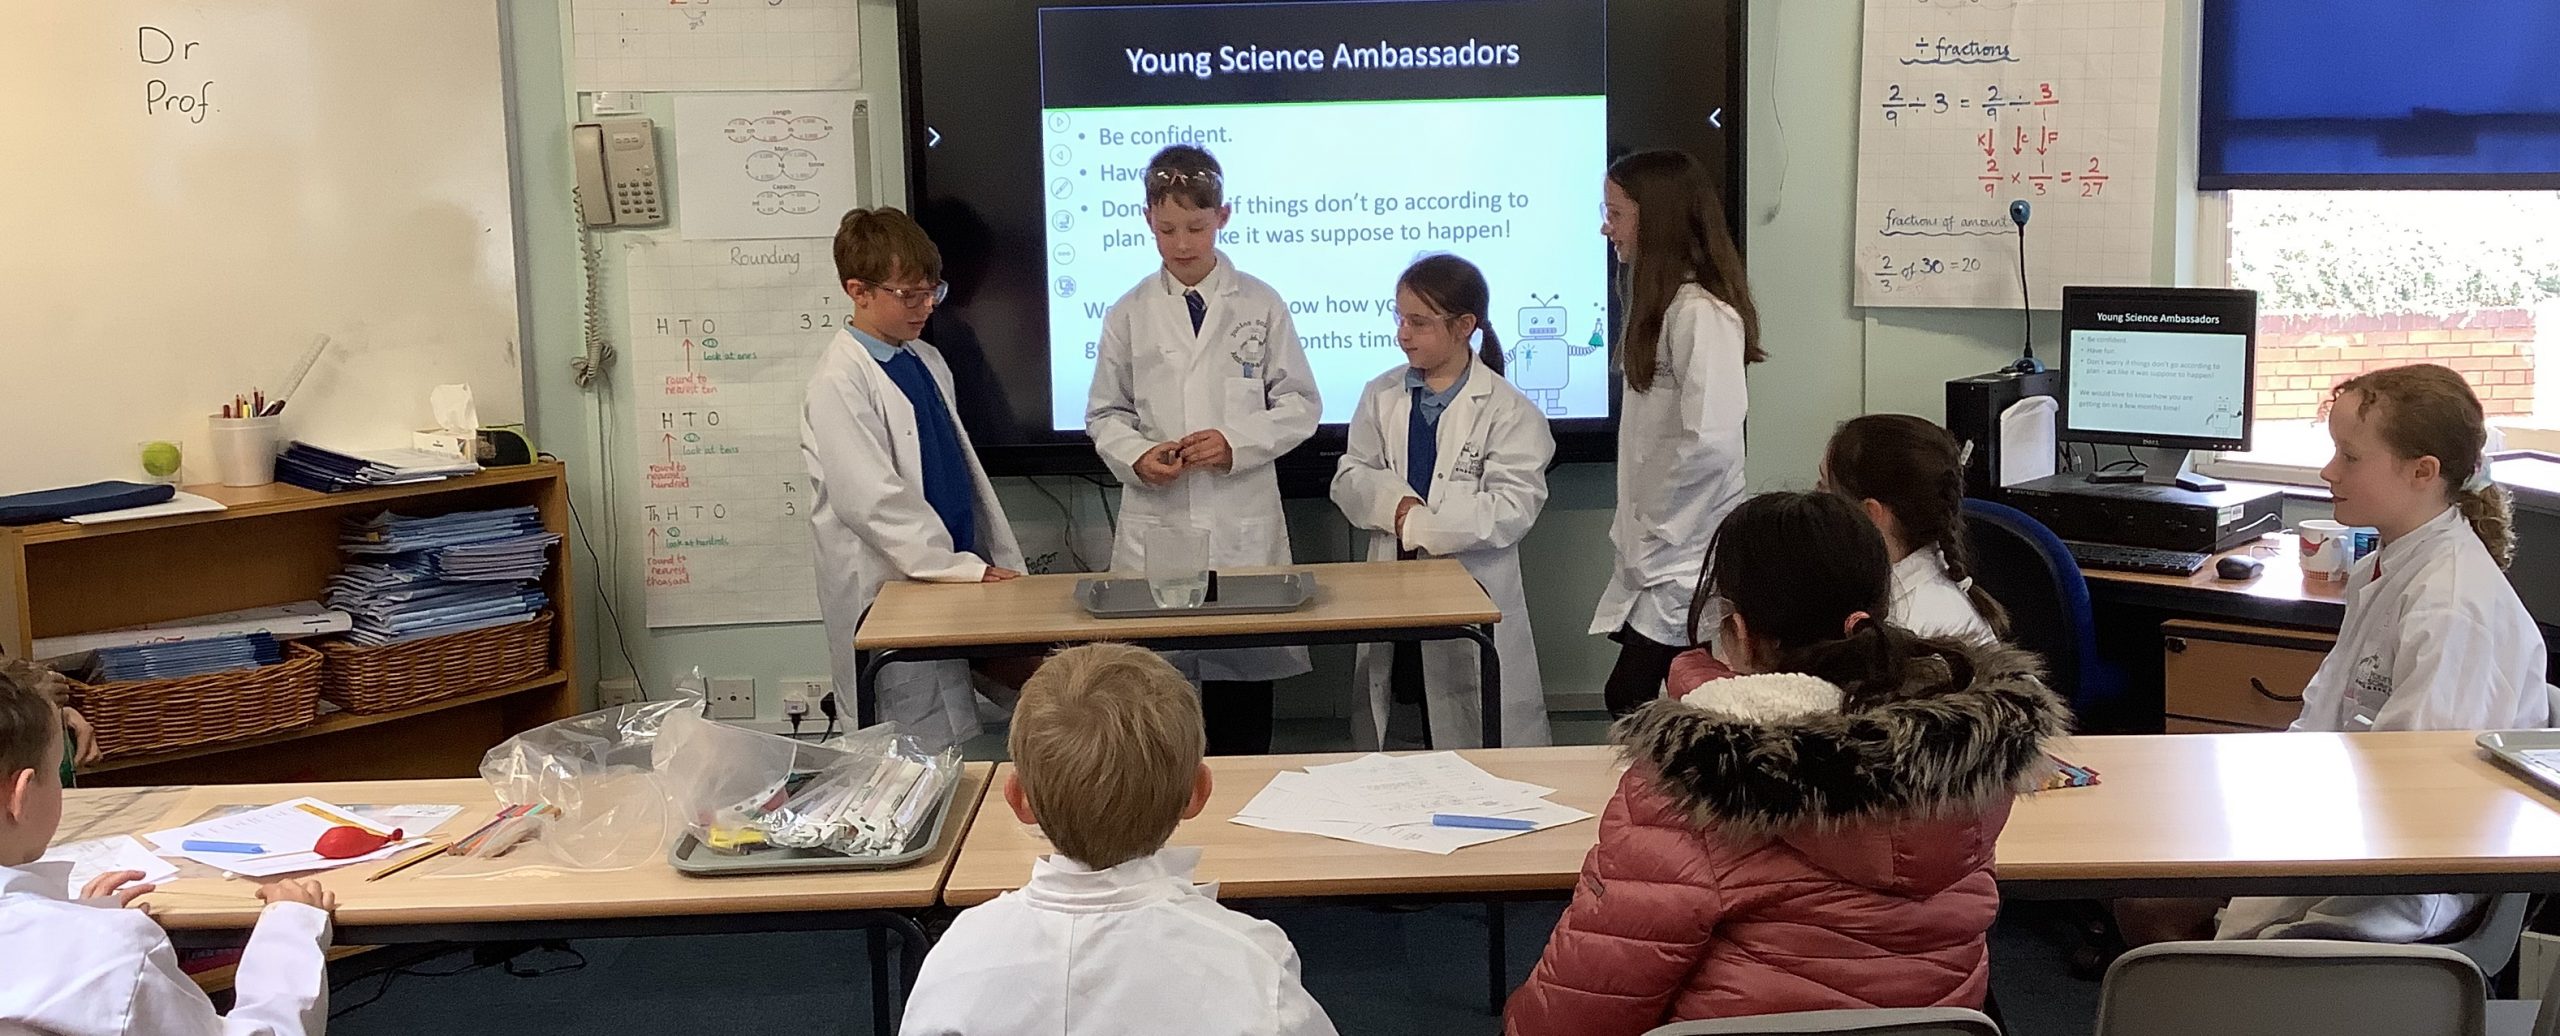 Primary Science Ambassadors in training in classroom